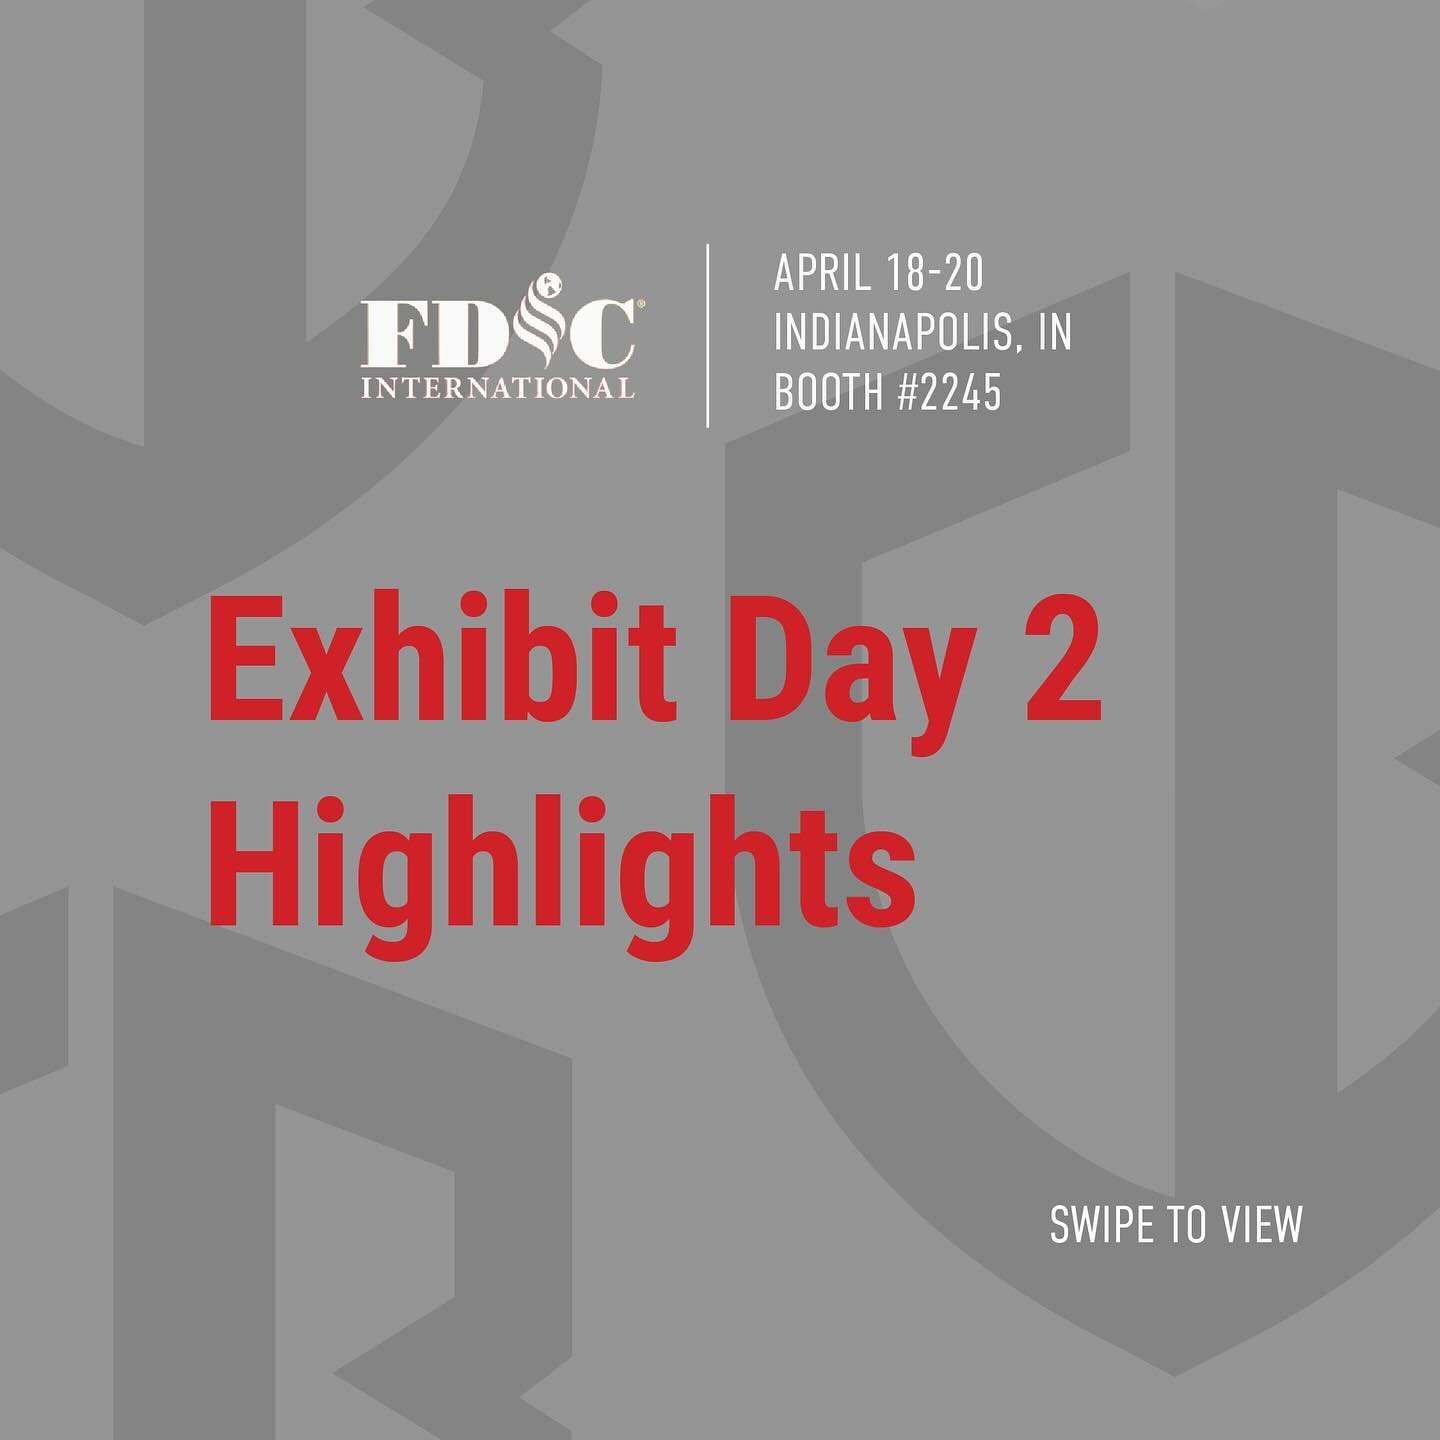 Day 2 of @fdicindy has been another successful day for CrewBoss!
&nbsp;
We&rsquo;ve valued connecting with firefighters from across the community.&nbsp;
&nbsp;
FDIC fosters collaboration in fire safety, and CrewBoss remains dedicated to showcasing PP